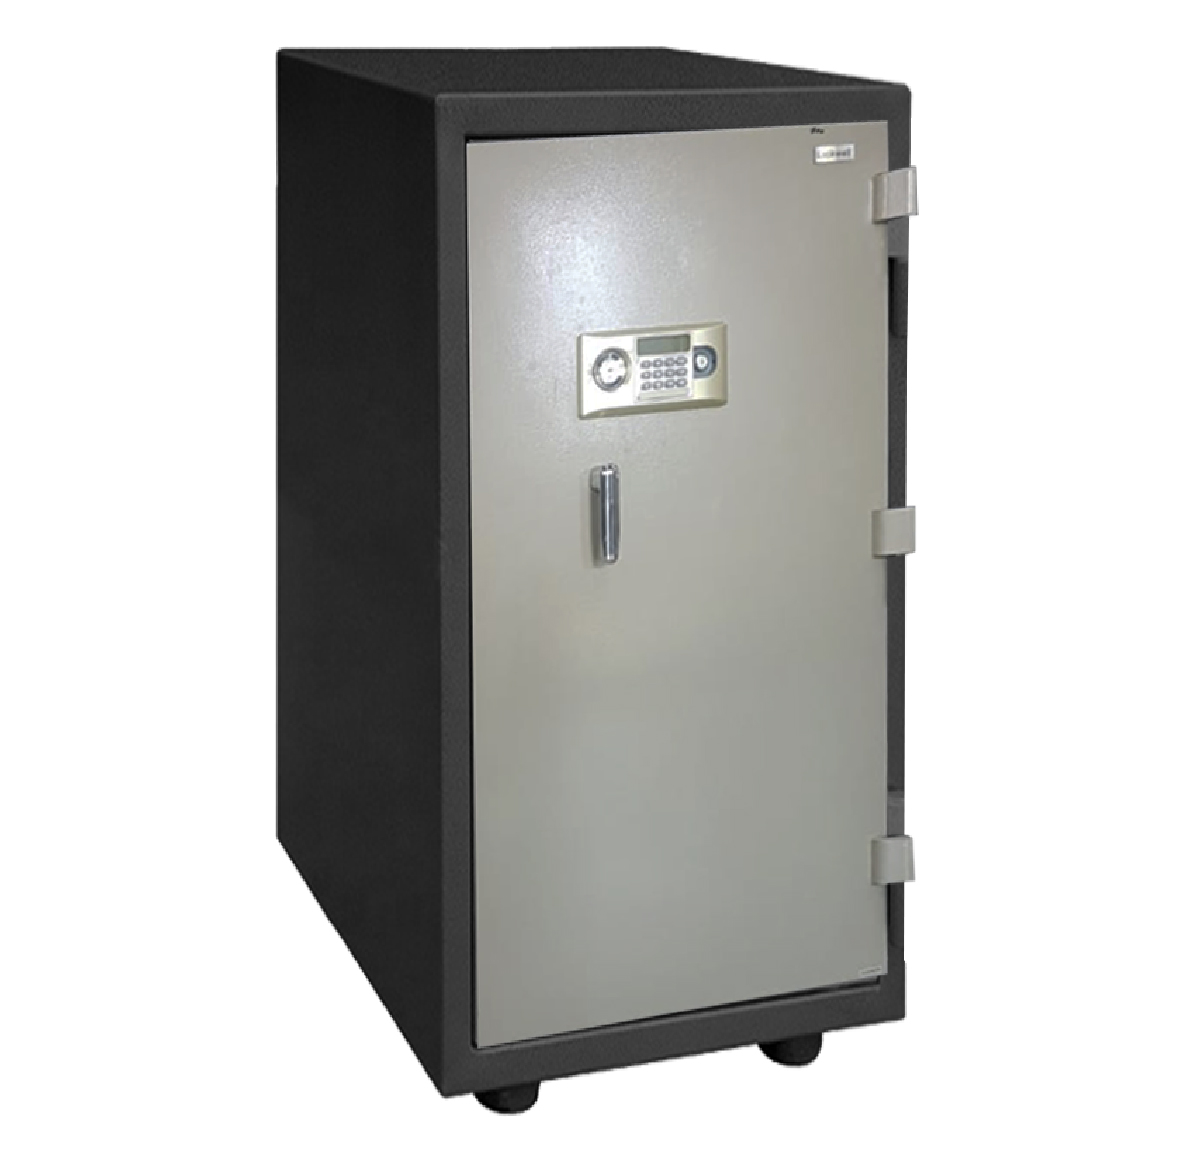 Lockwell ELectronic Fire Safe, YB1200ALD 